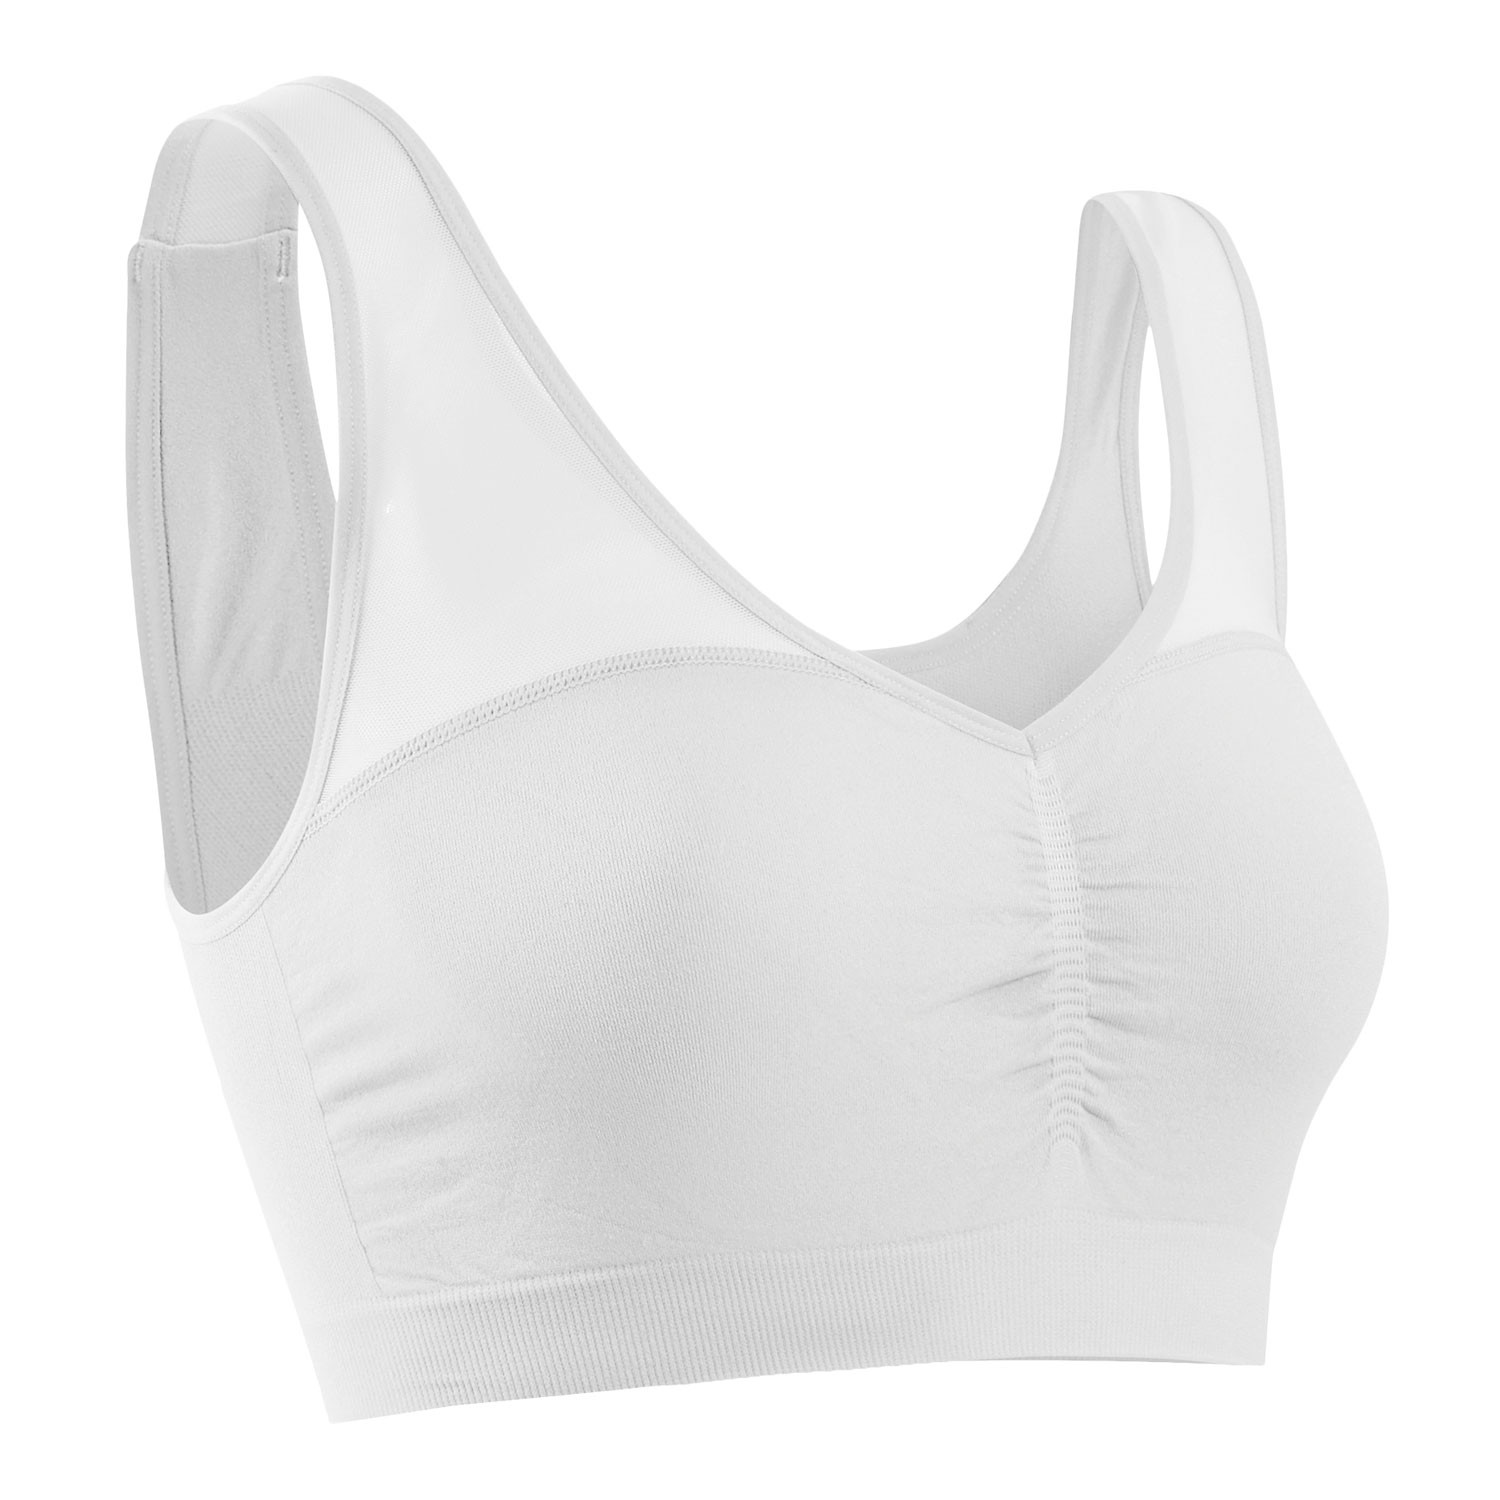 Women's Comfiaire Posture Support Bra - Smoothing Wide Straps - XL